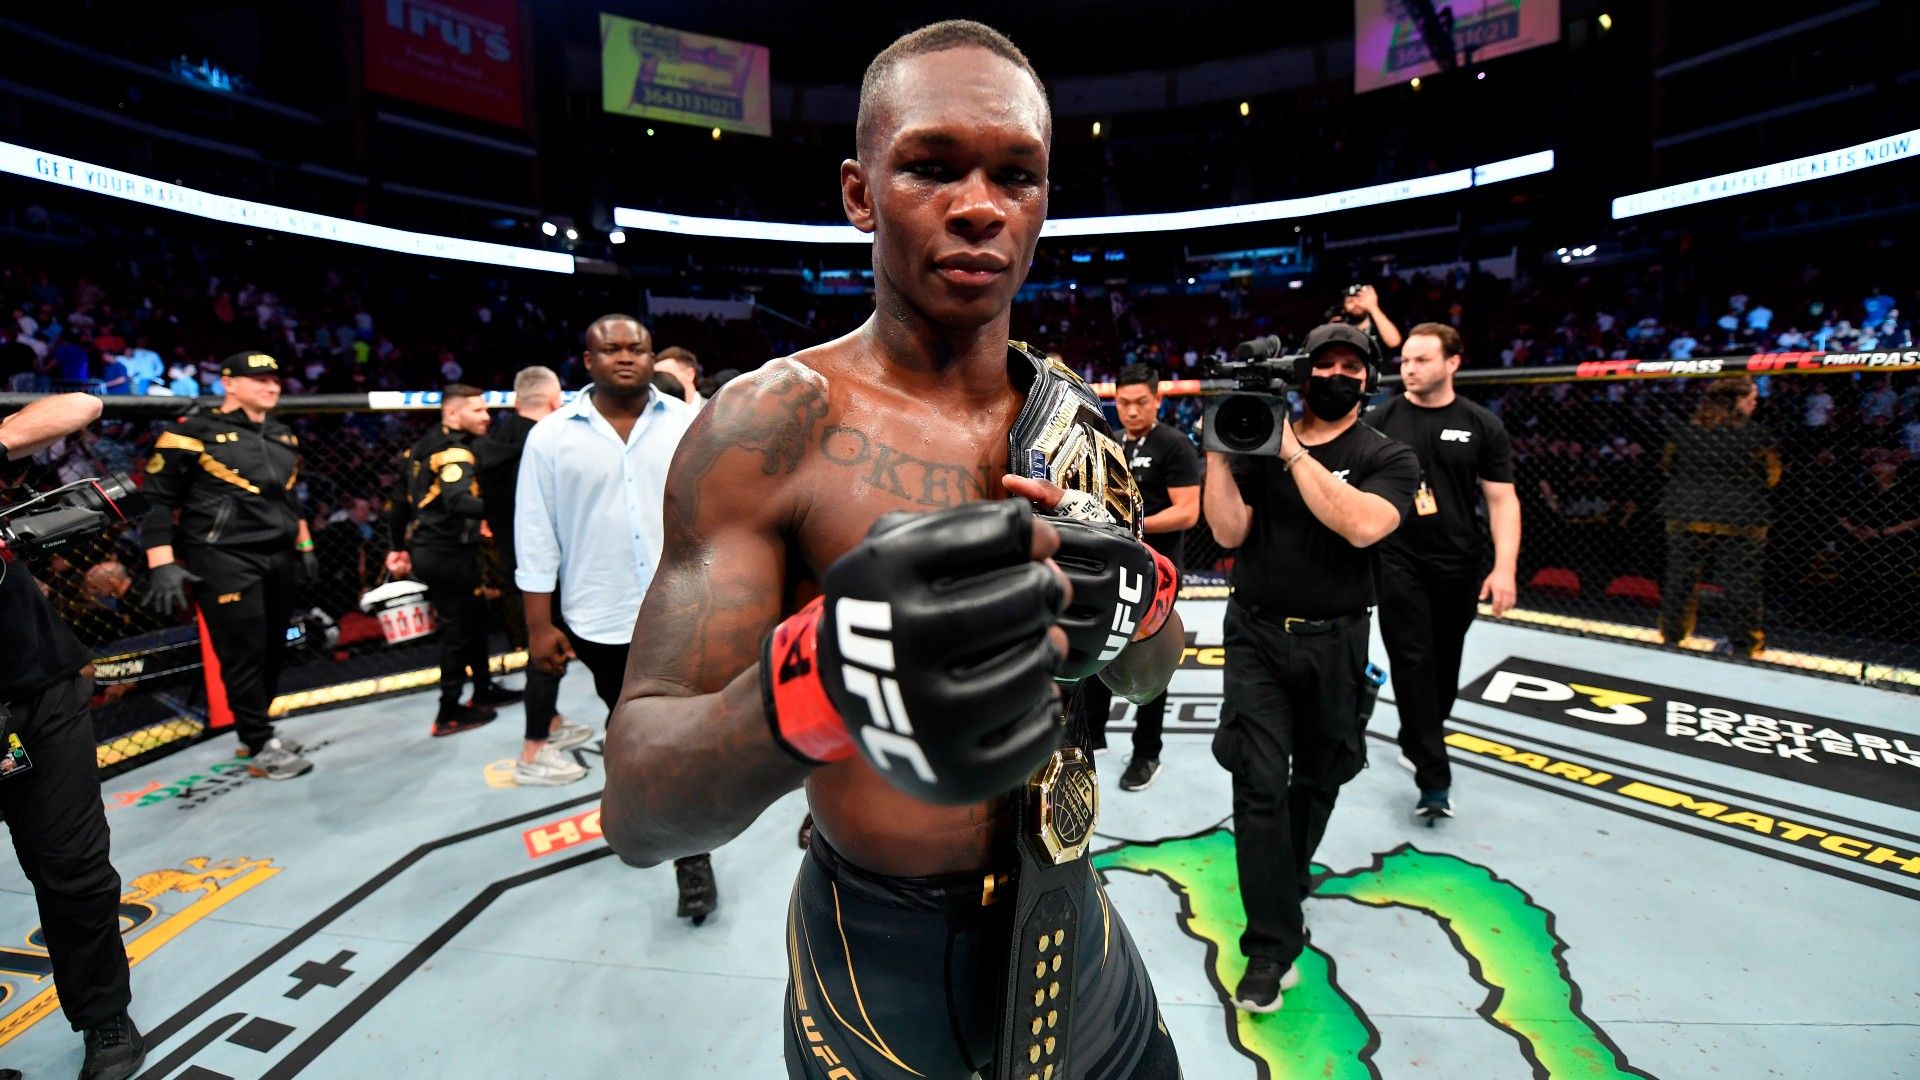 EXCLUSIVE: Israel Adesanya on re-match with Robert Whittaker, public perceptions and brushing off critics